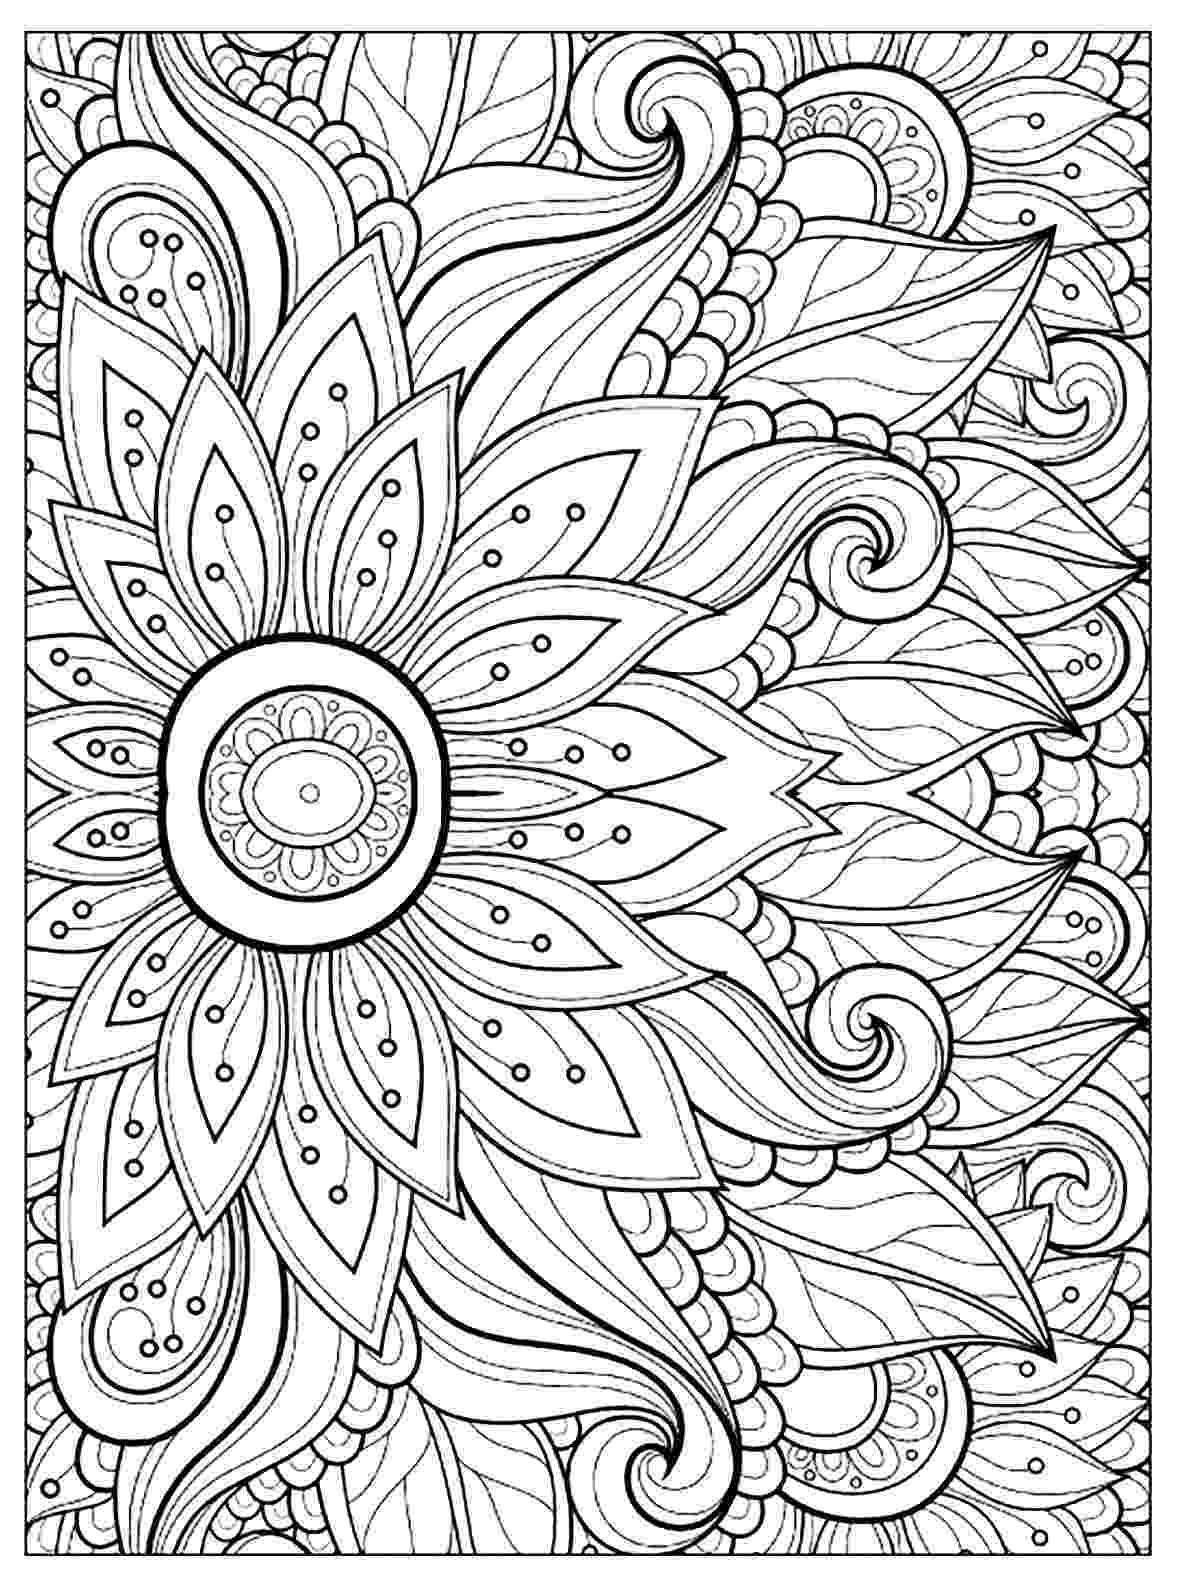 pics of flowers to color 10 cool coloring pages free premium templates of color pics to flowers 